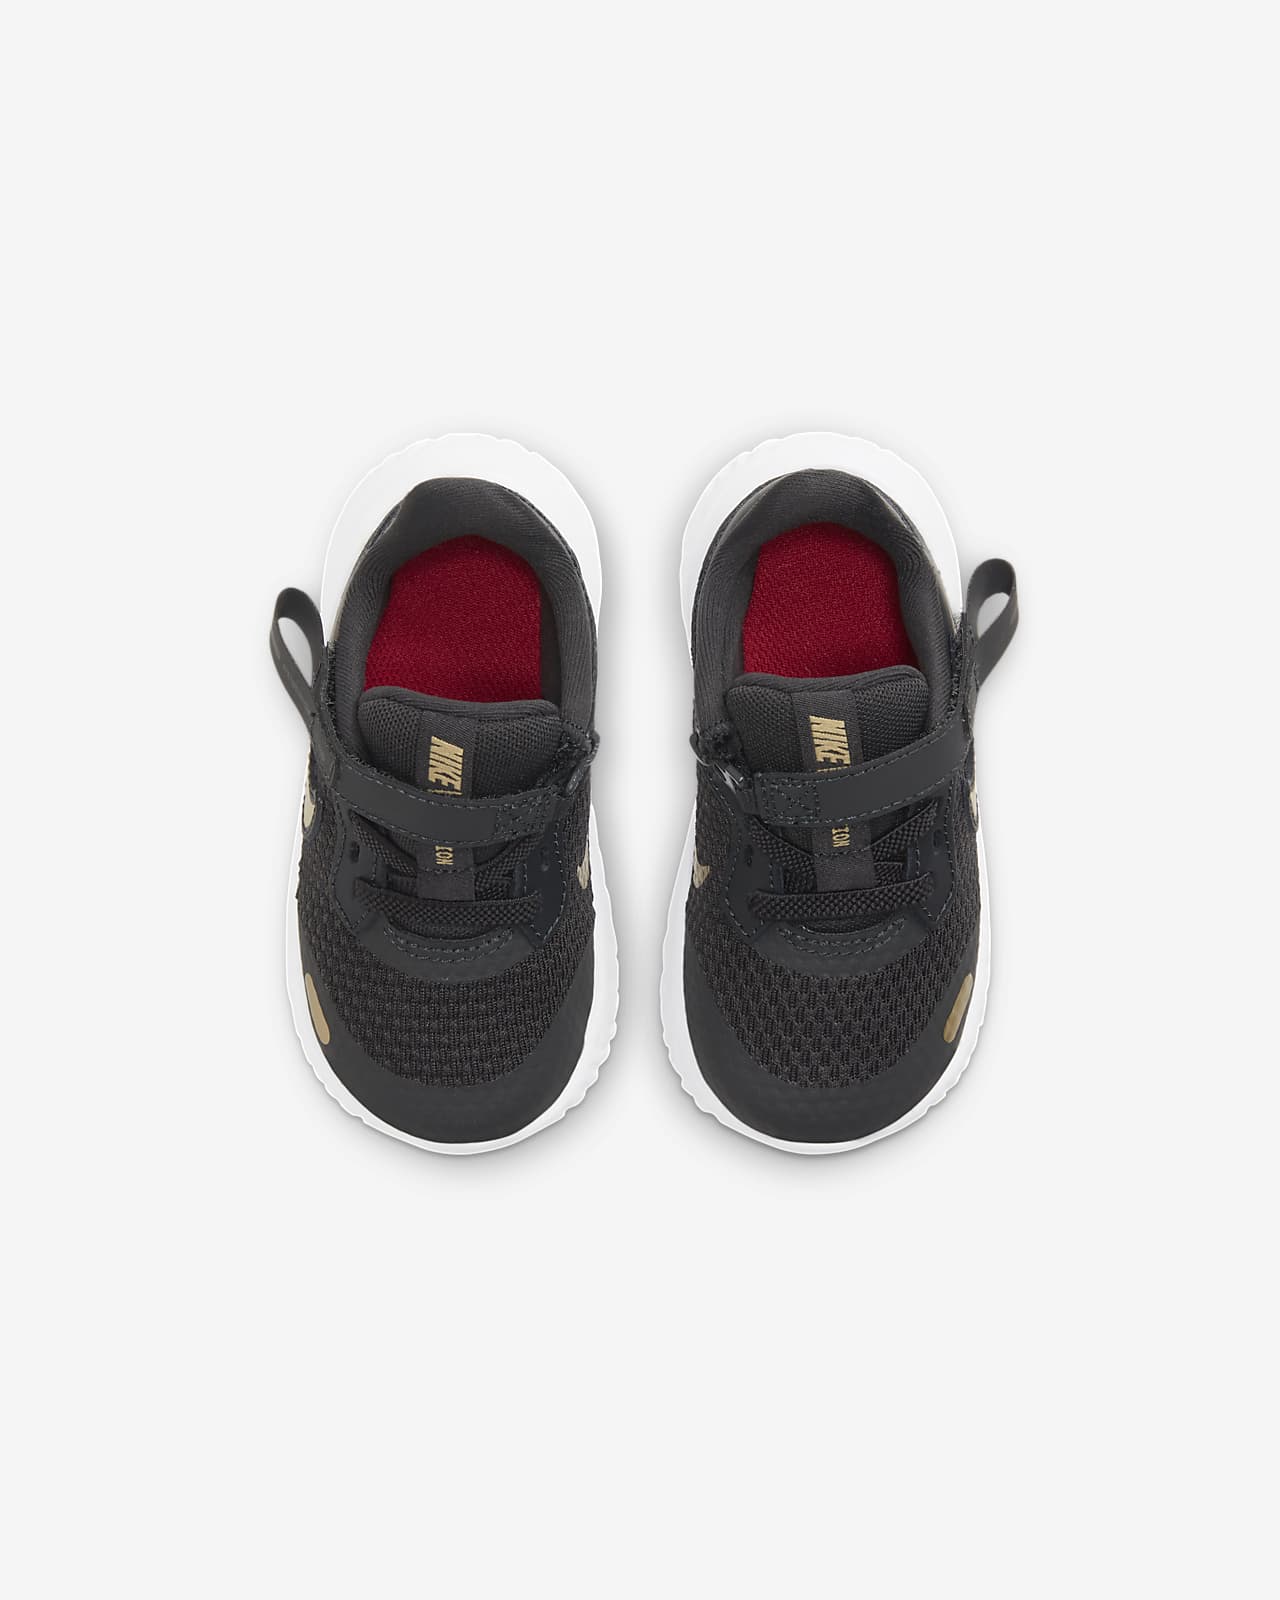 nike flyease toddler wide